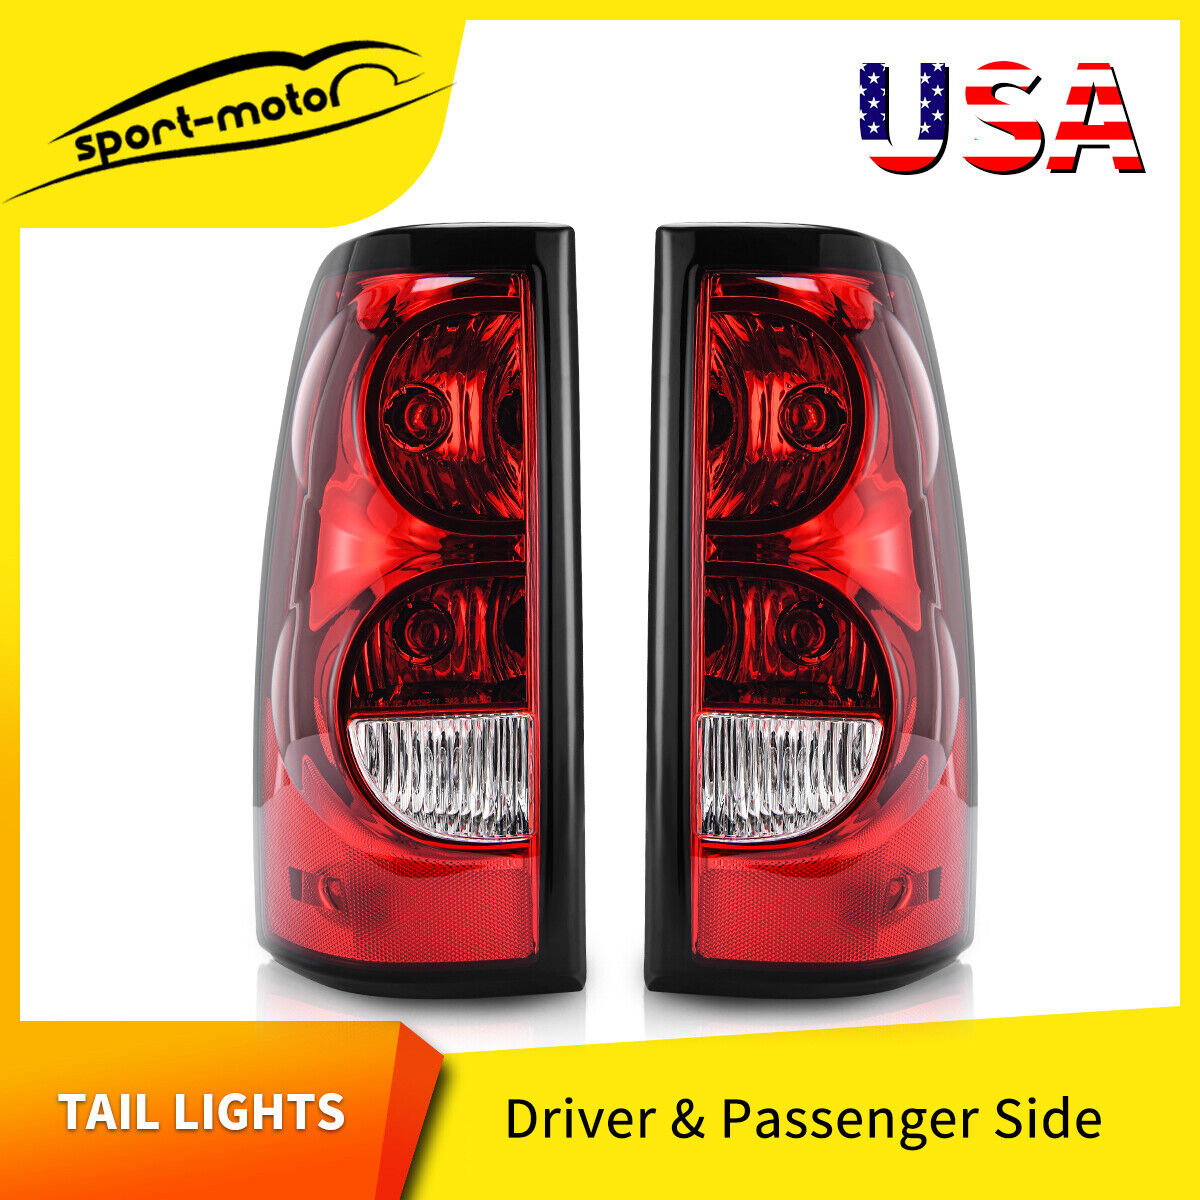 Red Tail Lights Brake Lamps For 2003-2006 Chevy Silverado 1500 2500 3500 HD